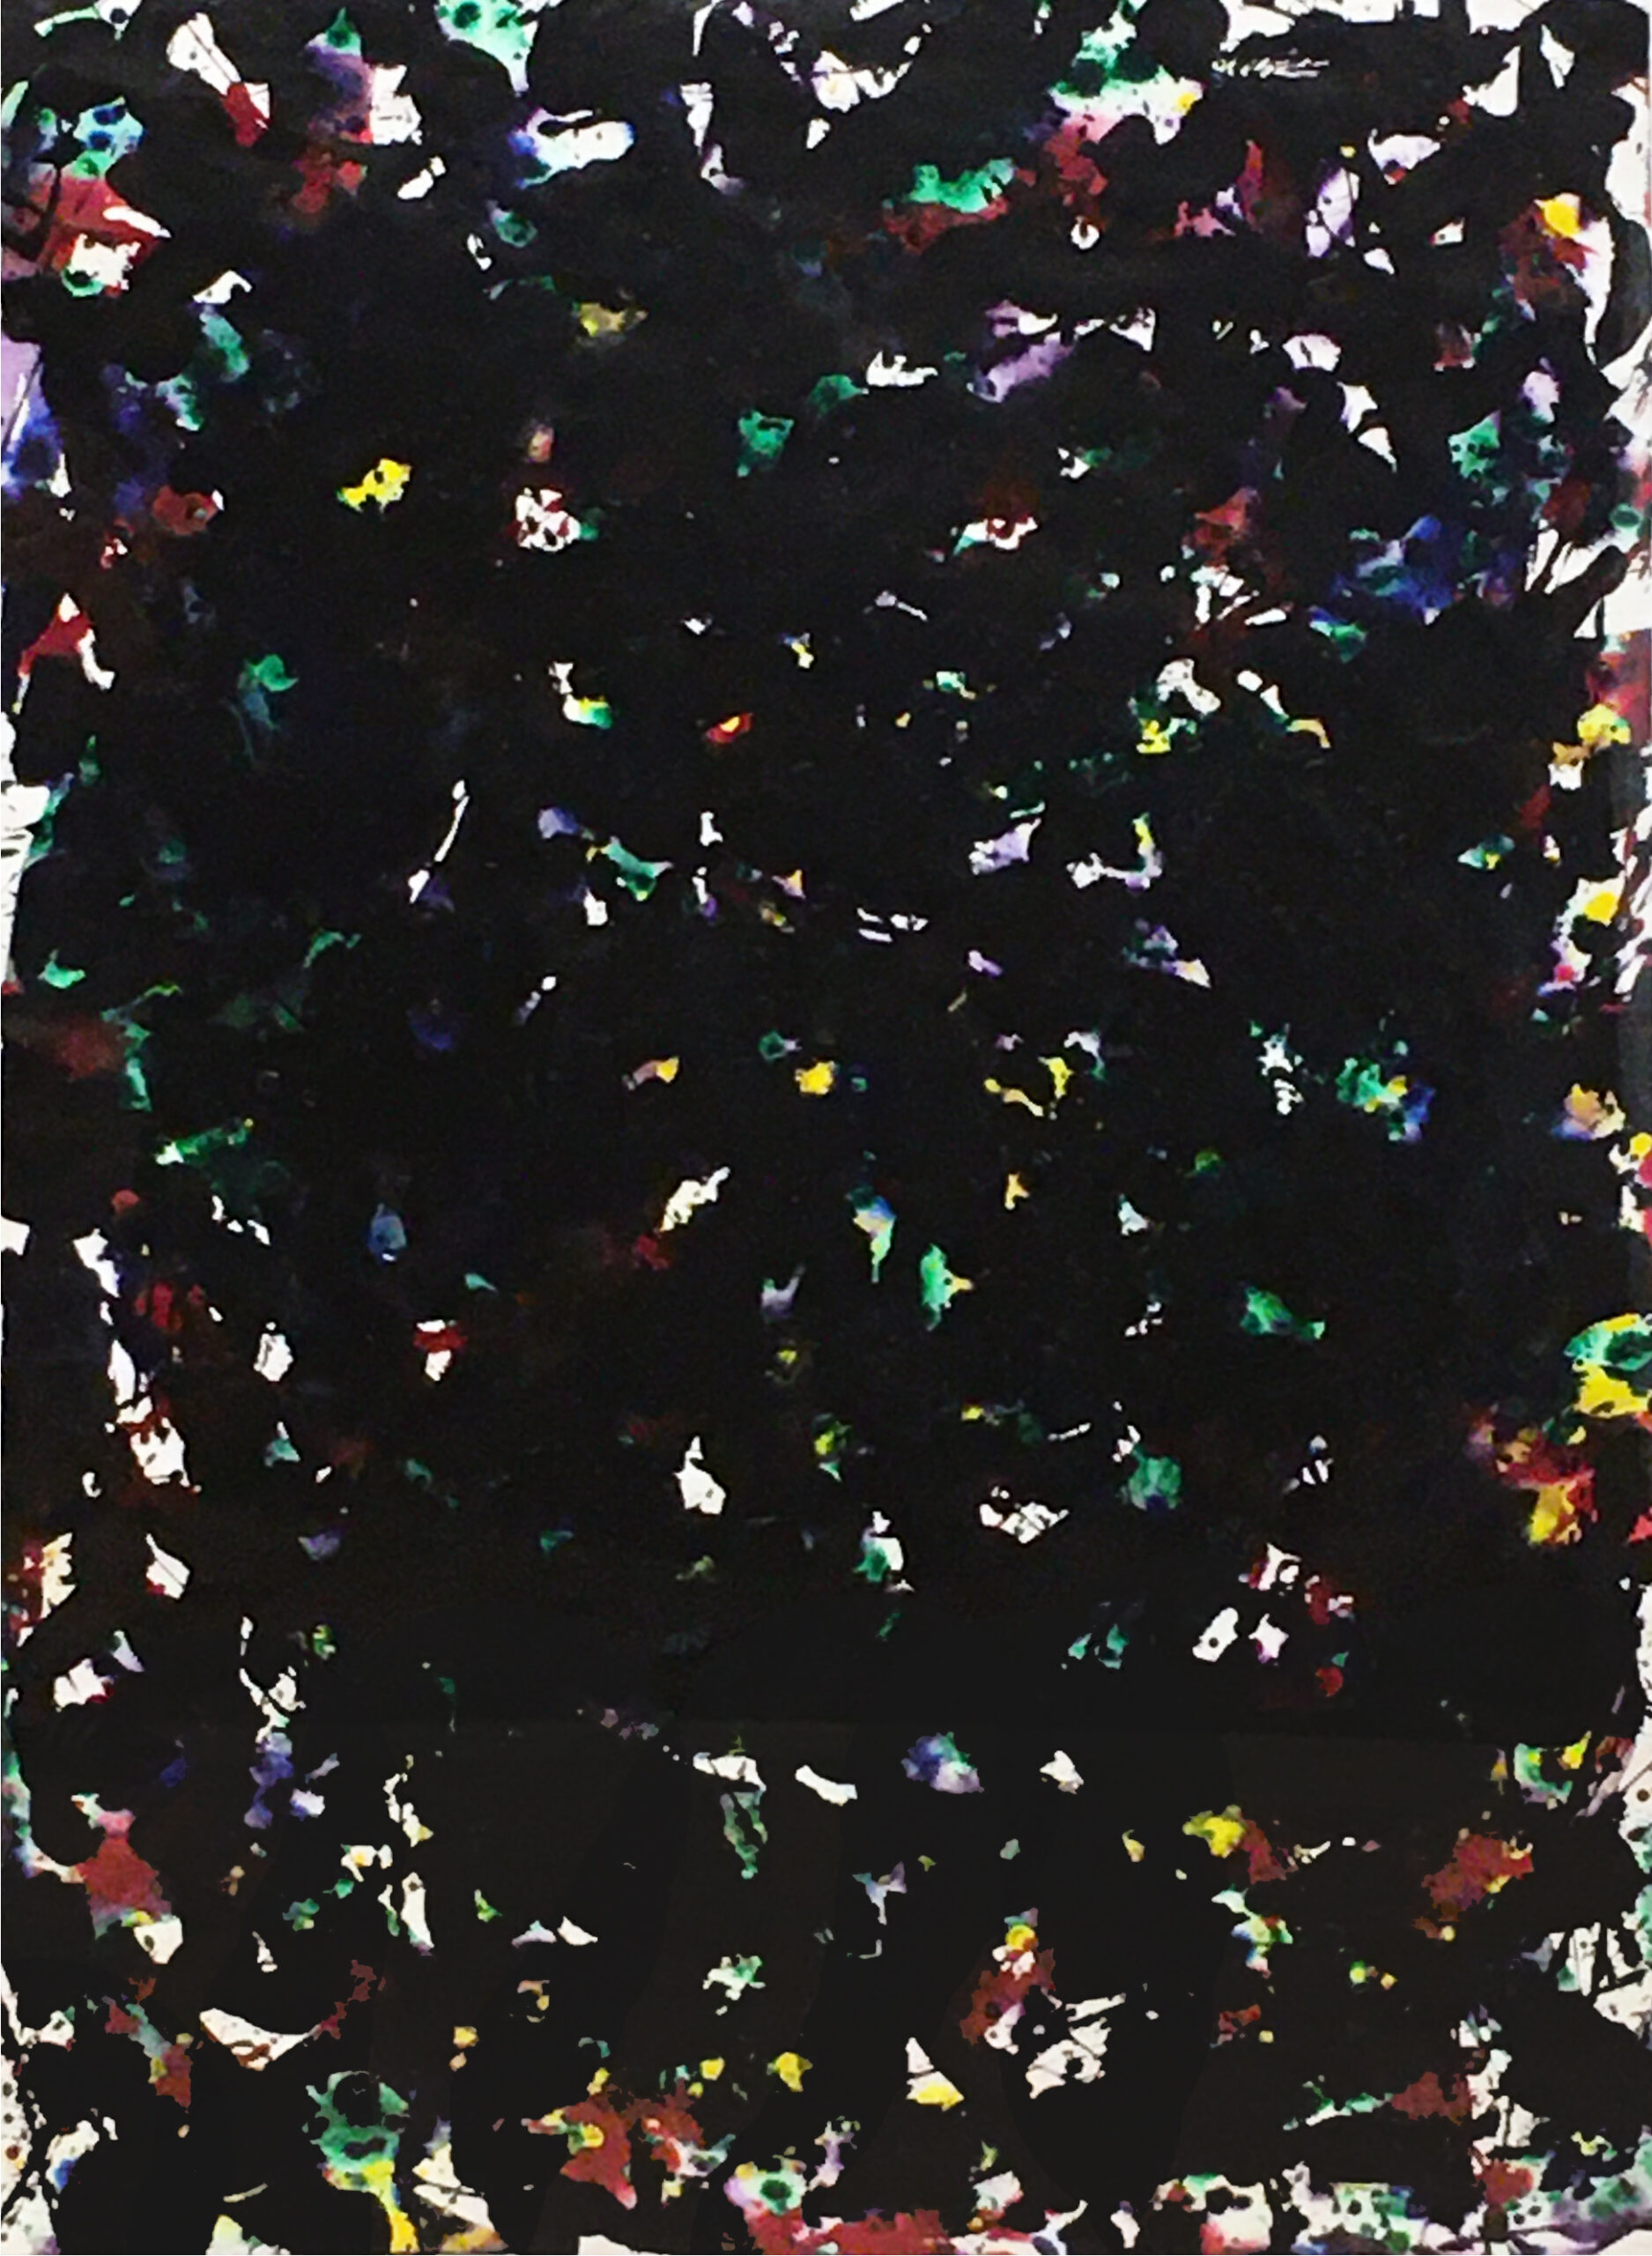 Sam Francis Painting on Paper with Lots of Dark Paint